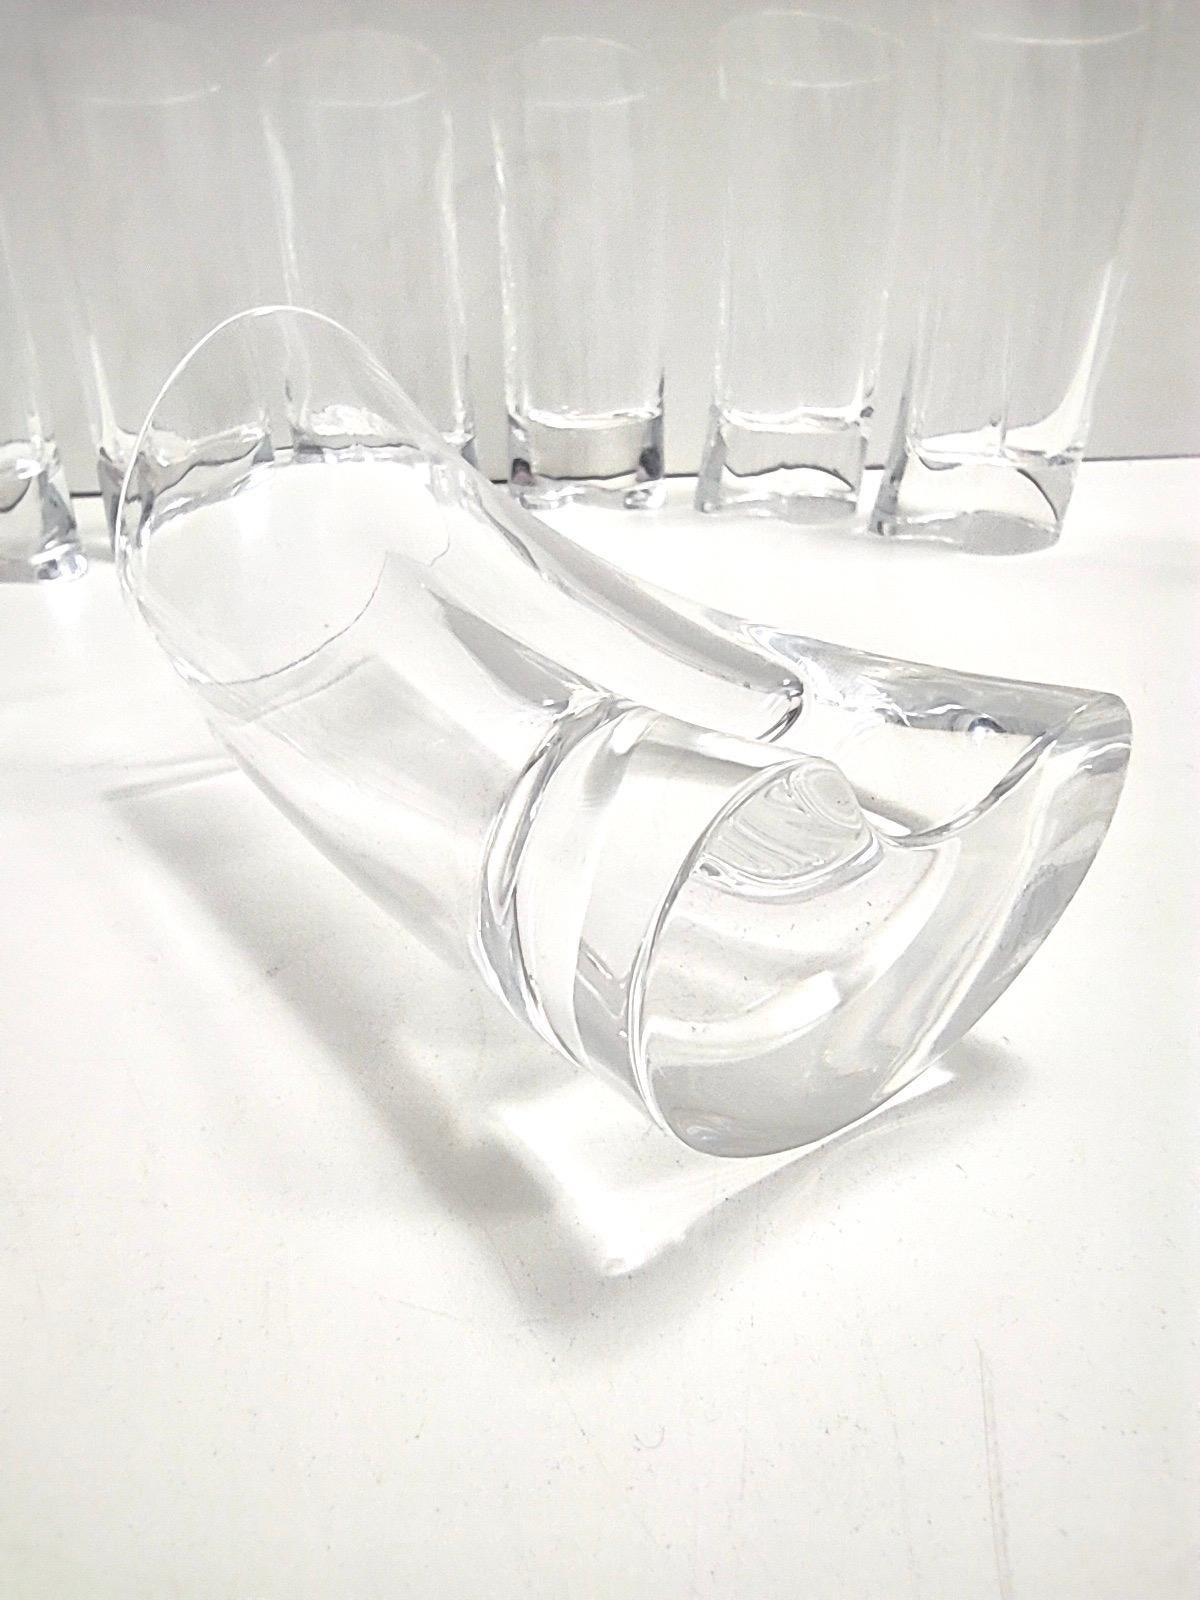 Set of Twelve Crystal Drinking Glasses by A.Mangiarotti for Cristallerie Colle For Sale 3